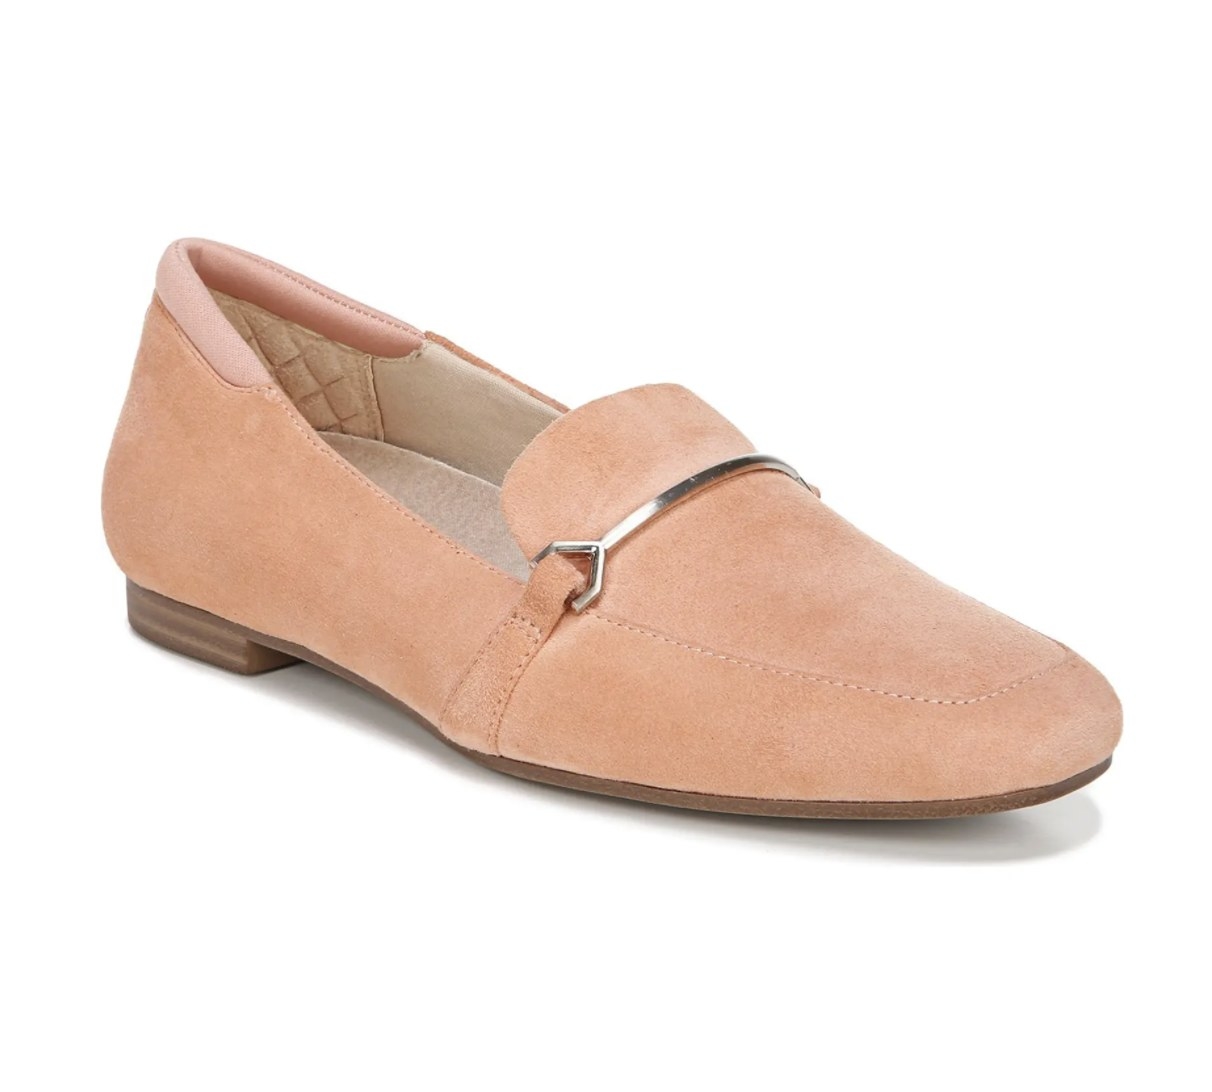 Blush pink loafers